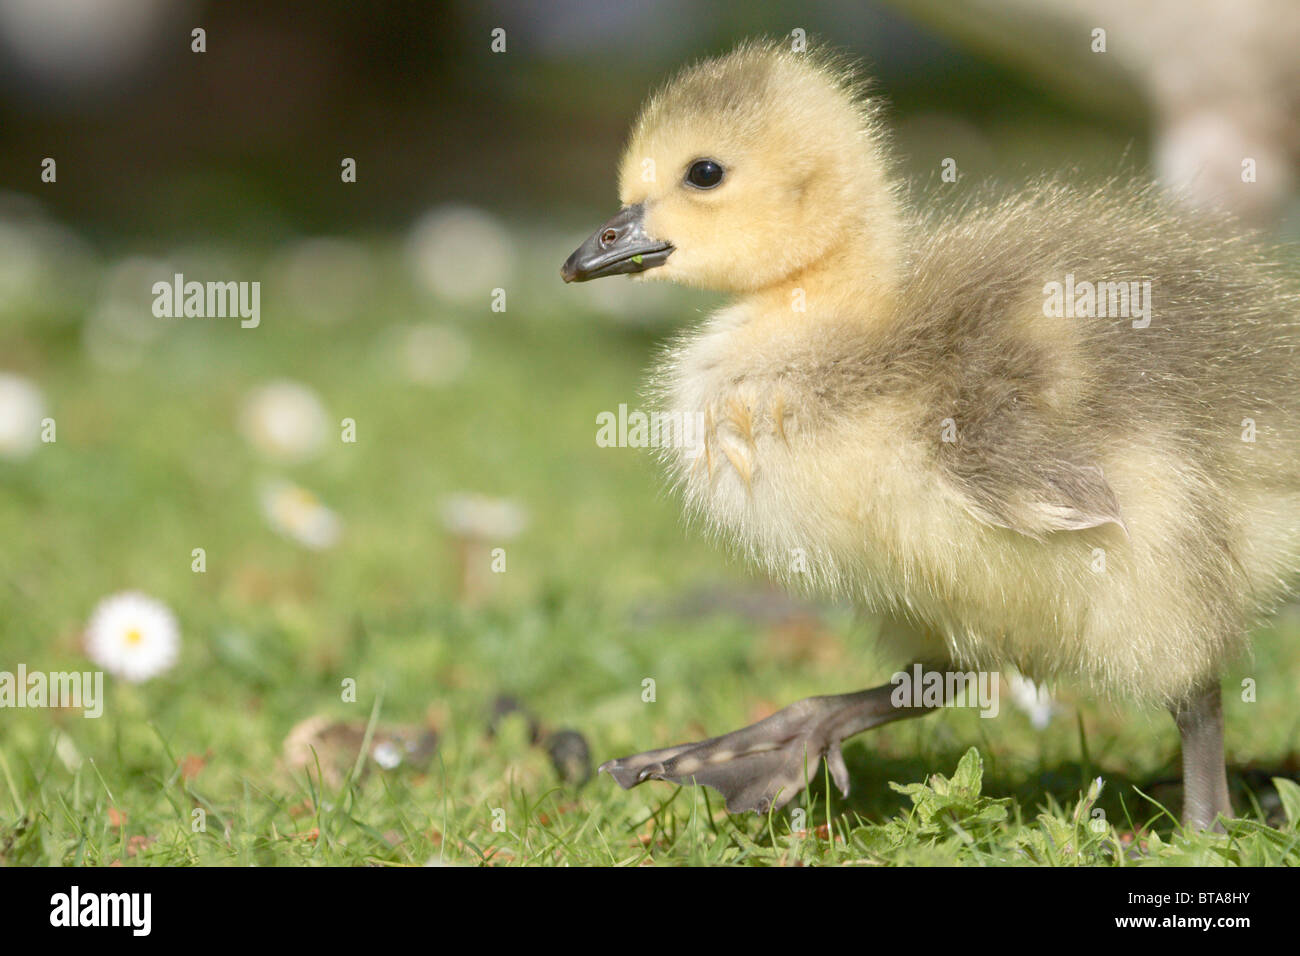 A baby gosling makes small steps through woodland grass in spring. Stock Photo